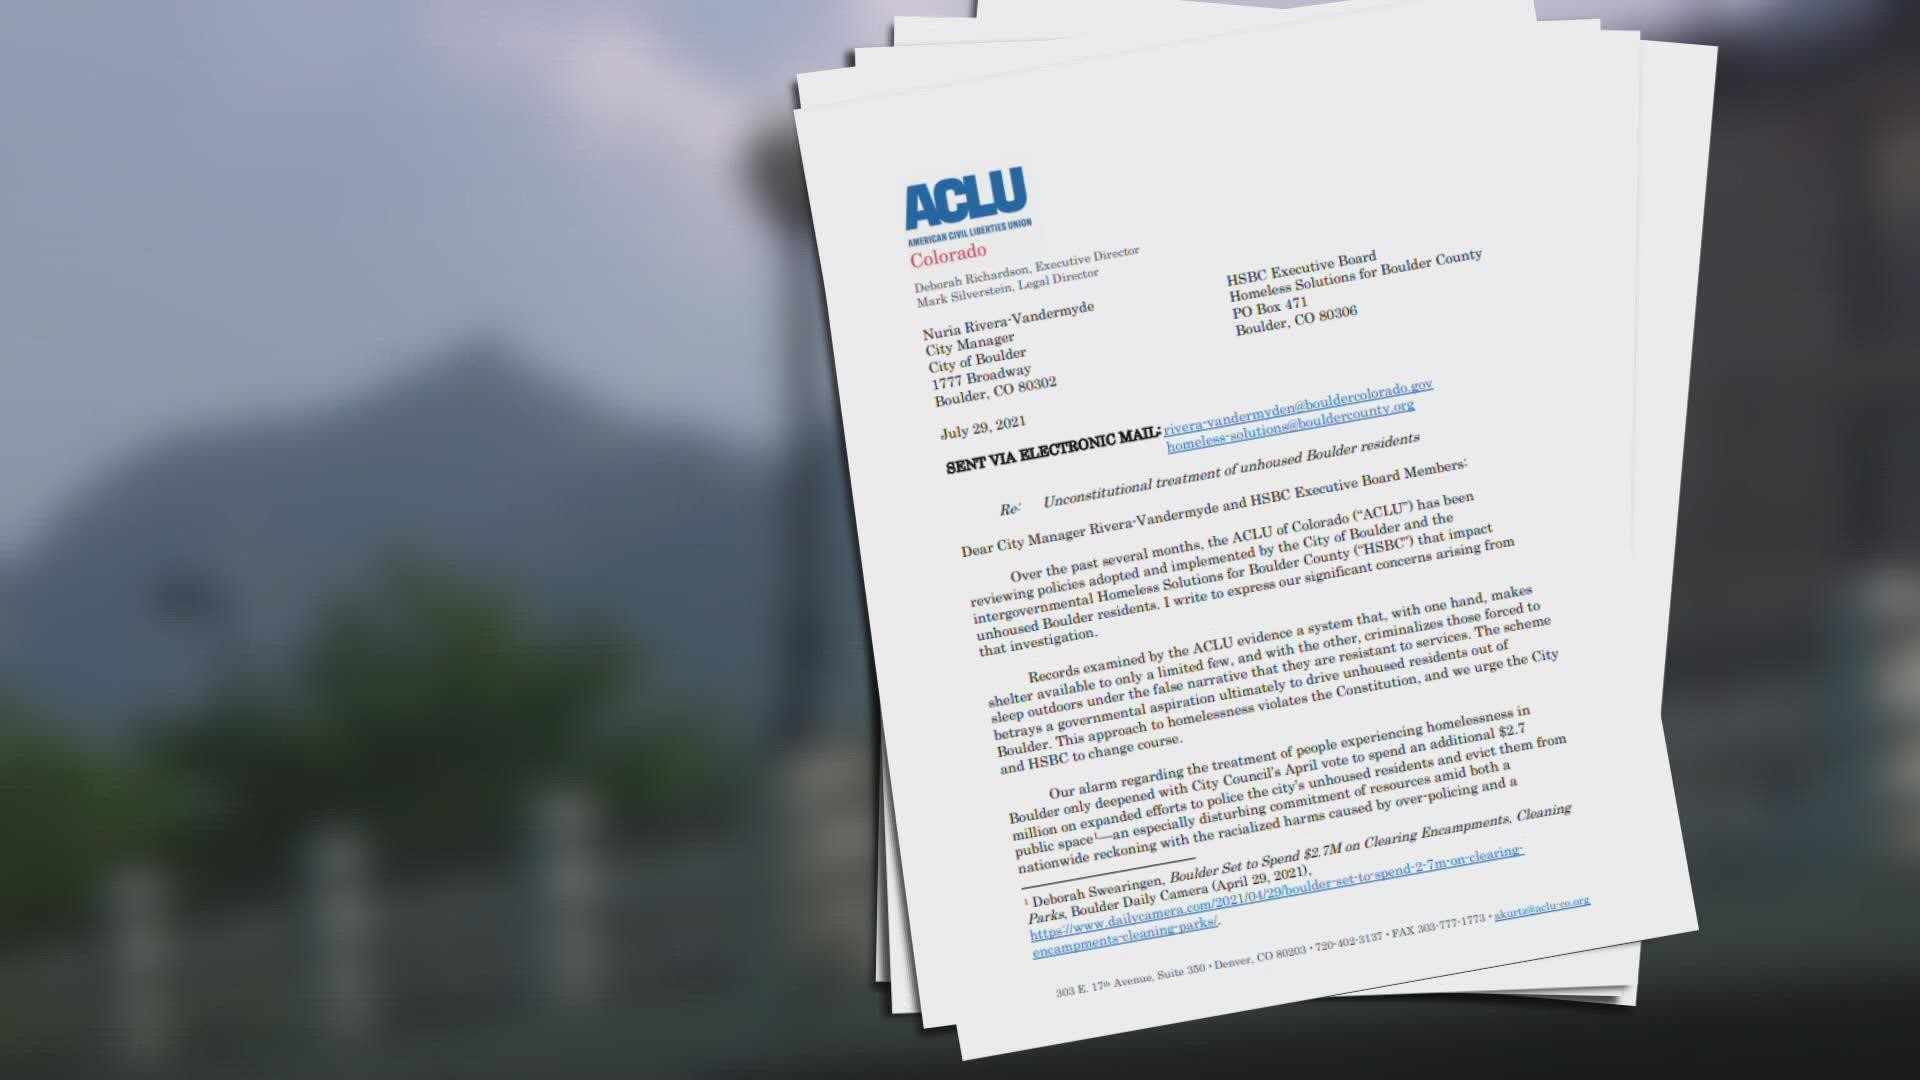 The ACLU of Colorado is suing the city of Boulder over its public camping ban. The lawsuit accuses the city of slashing funds for its shelter.